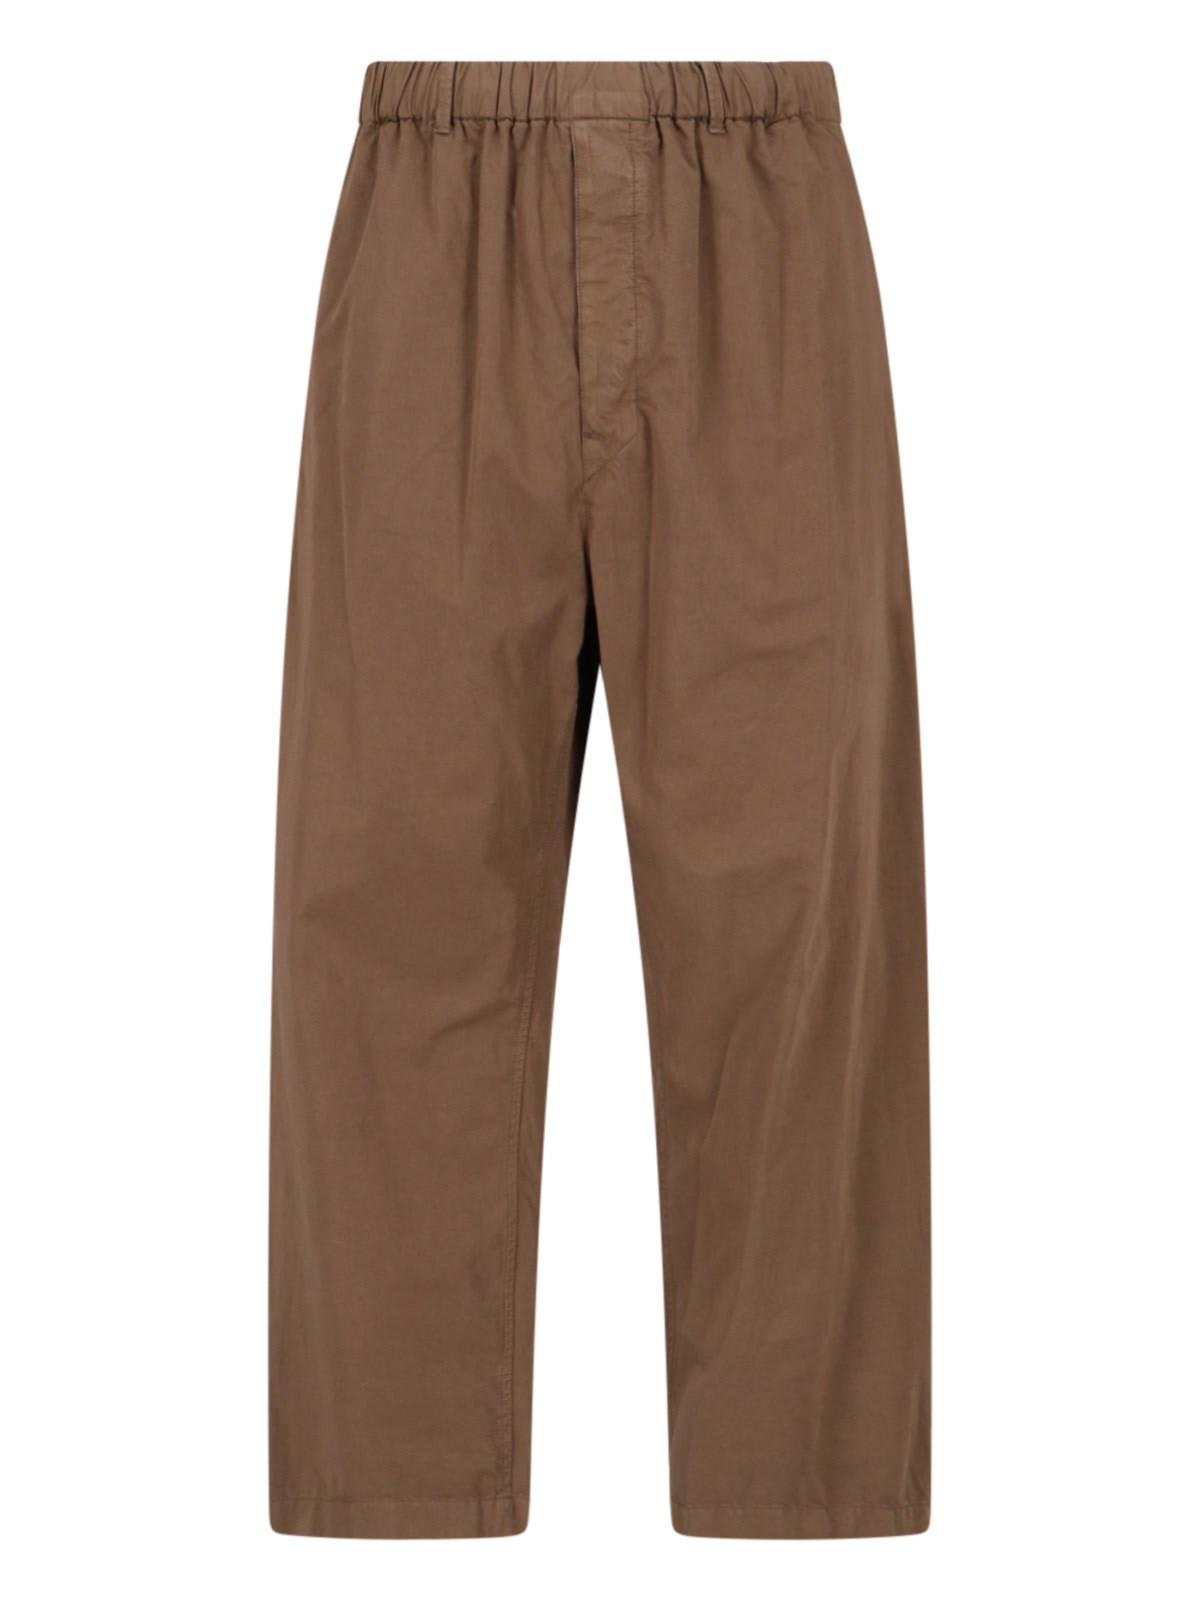 LEMAIRE RELAXED FIT trousers